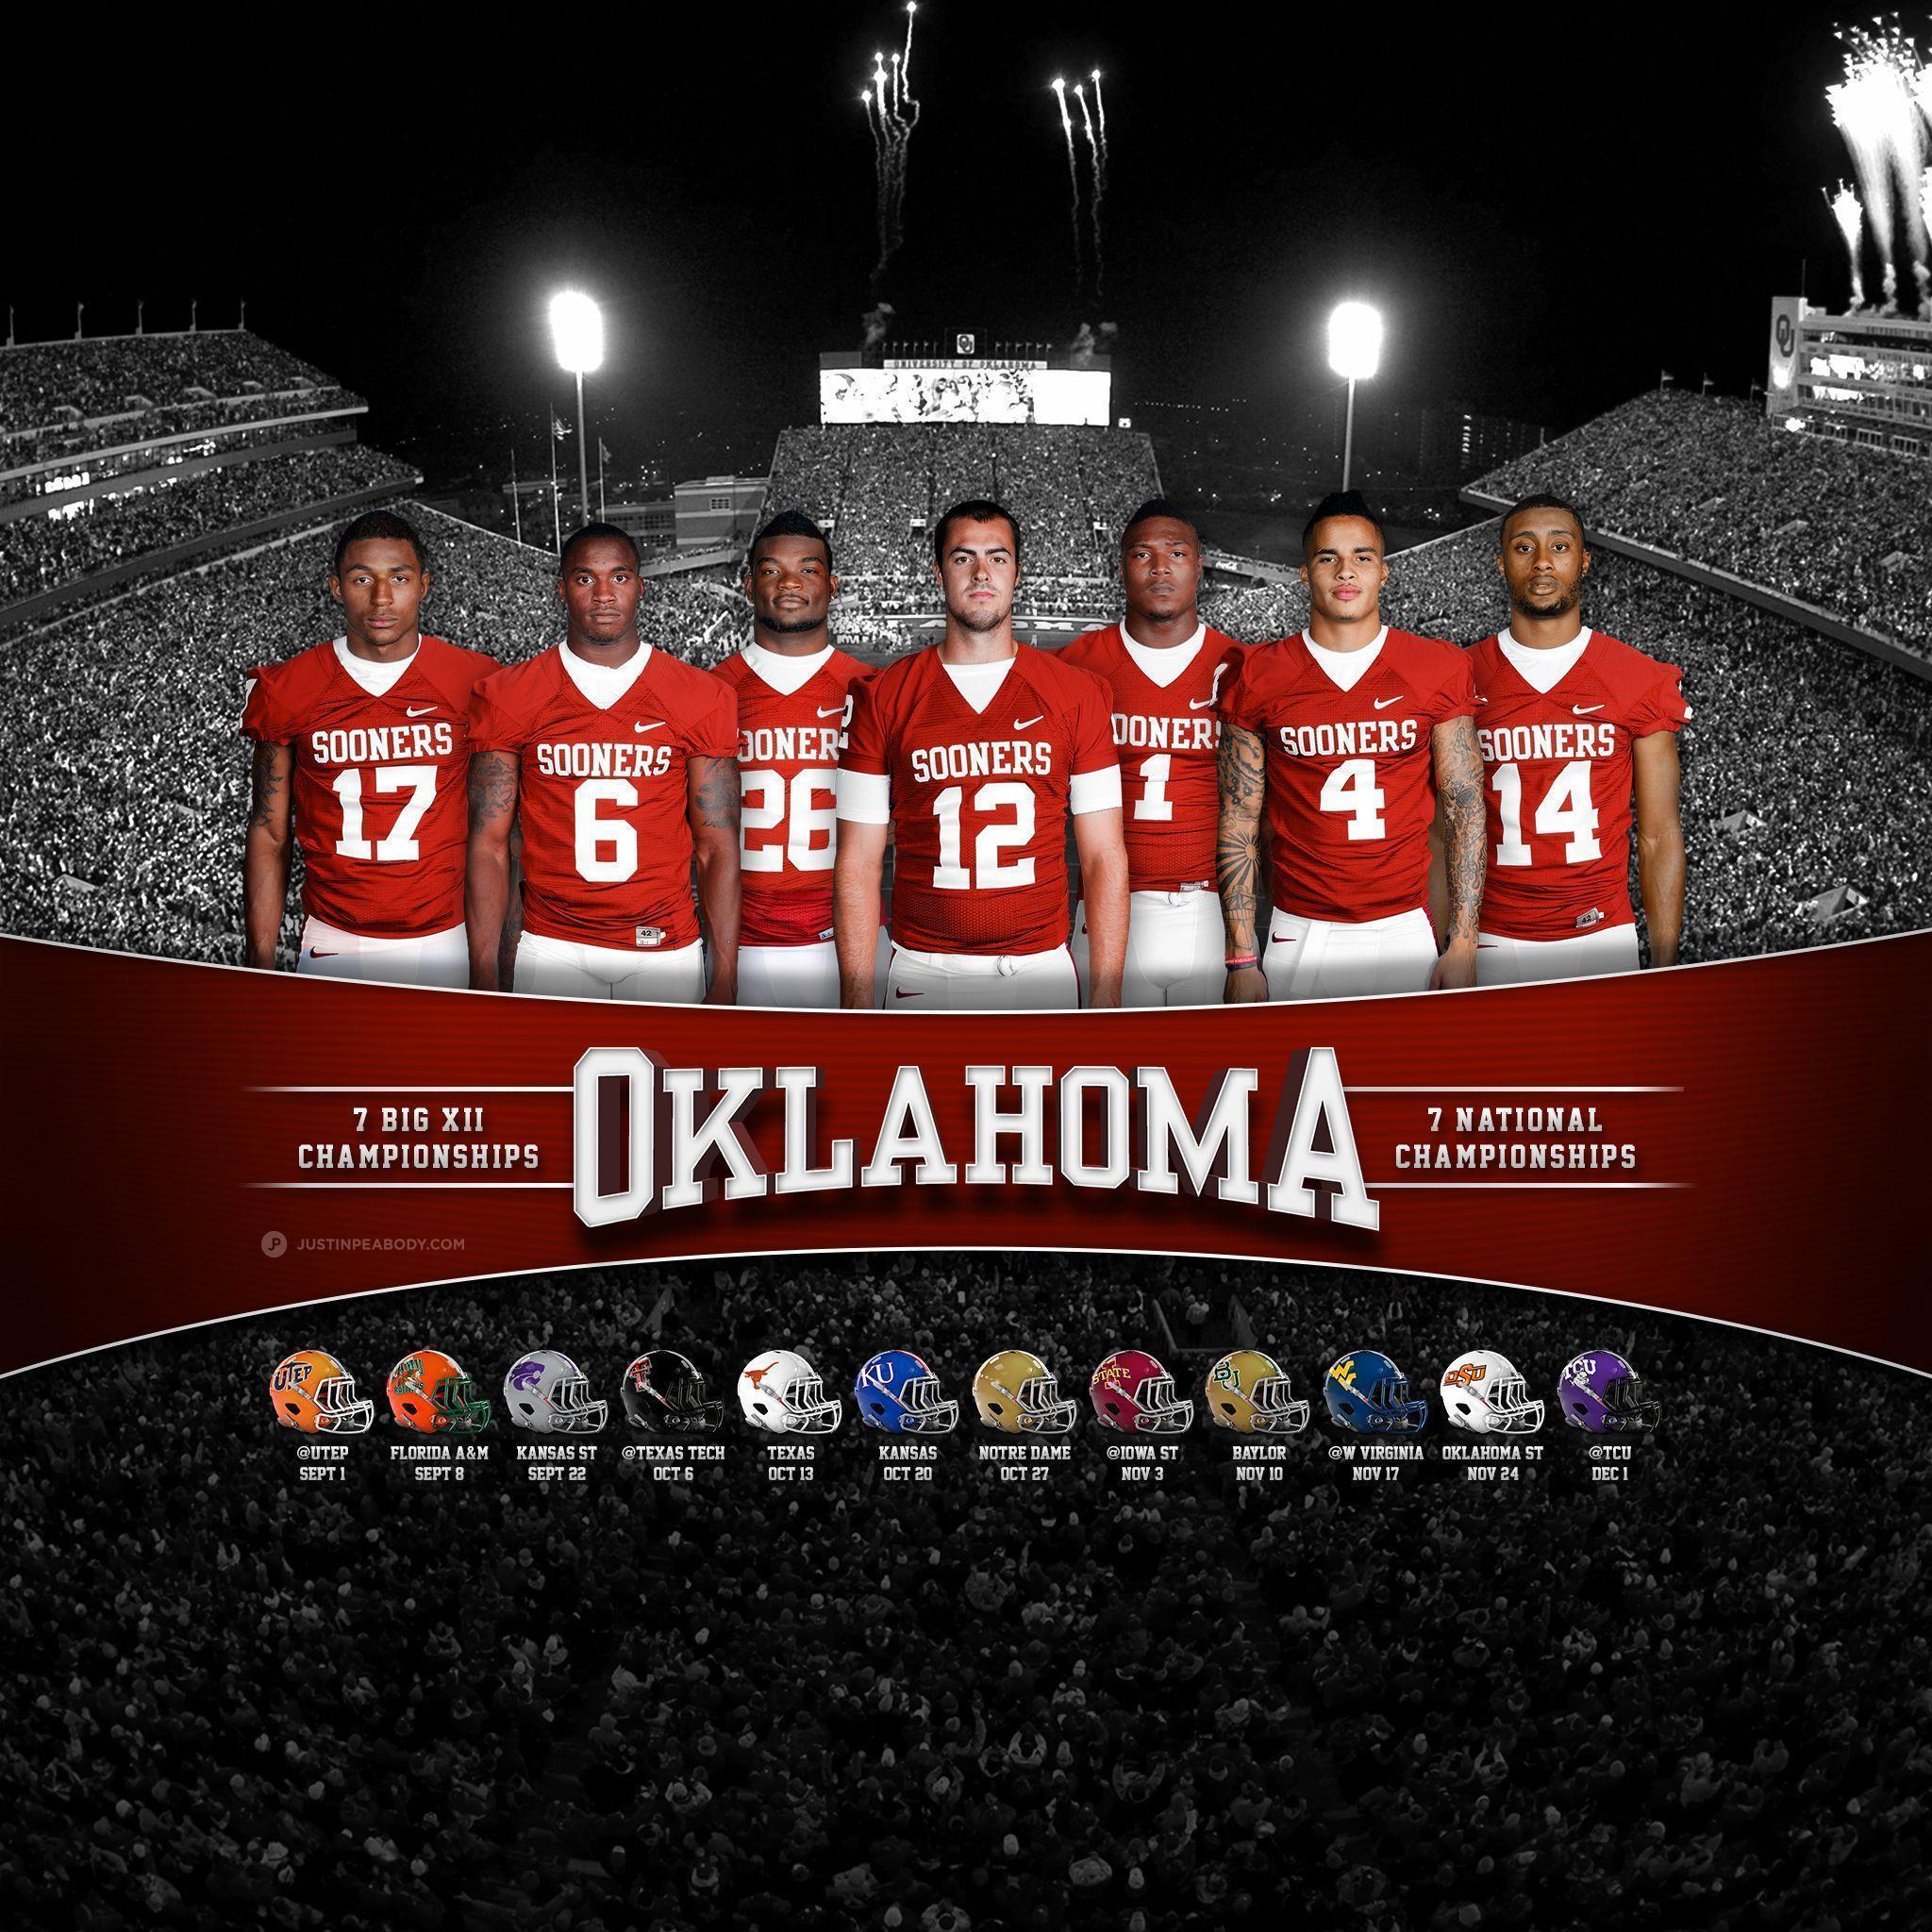 OU Football Wallpaper [Archive].com Message Boards